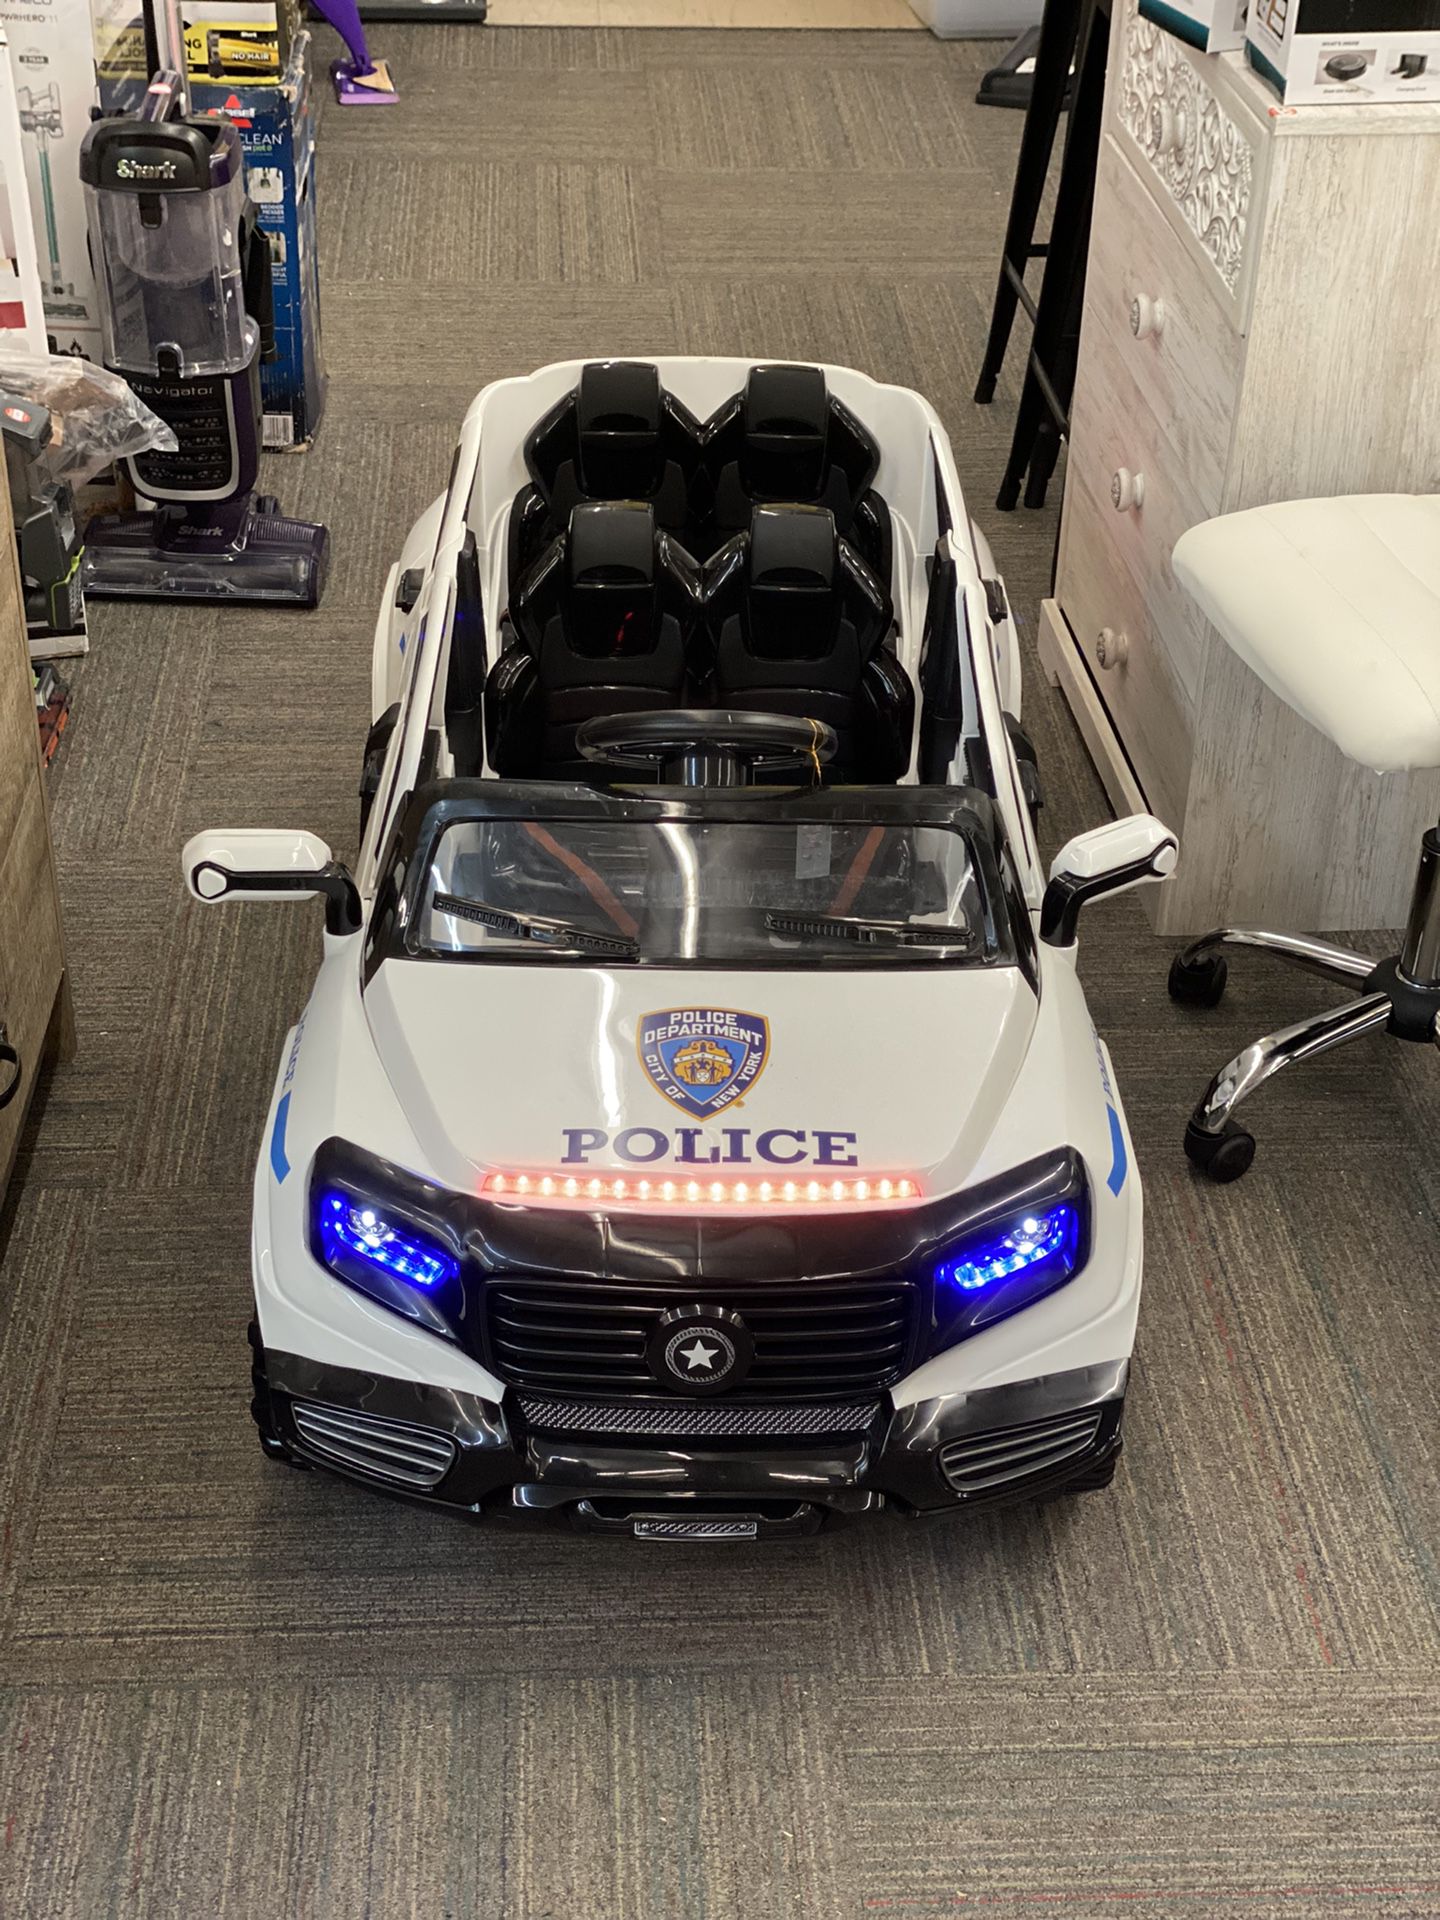 💫Brand New💫 NYPD Police Car 12V Ride-On